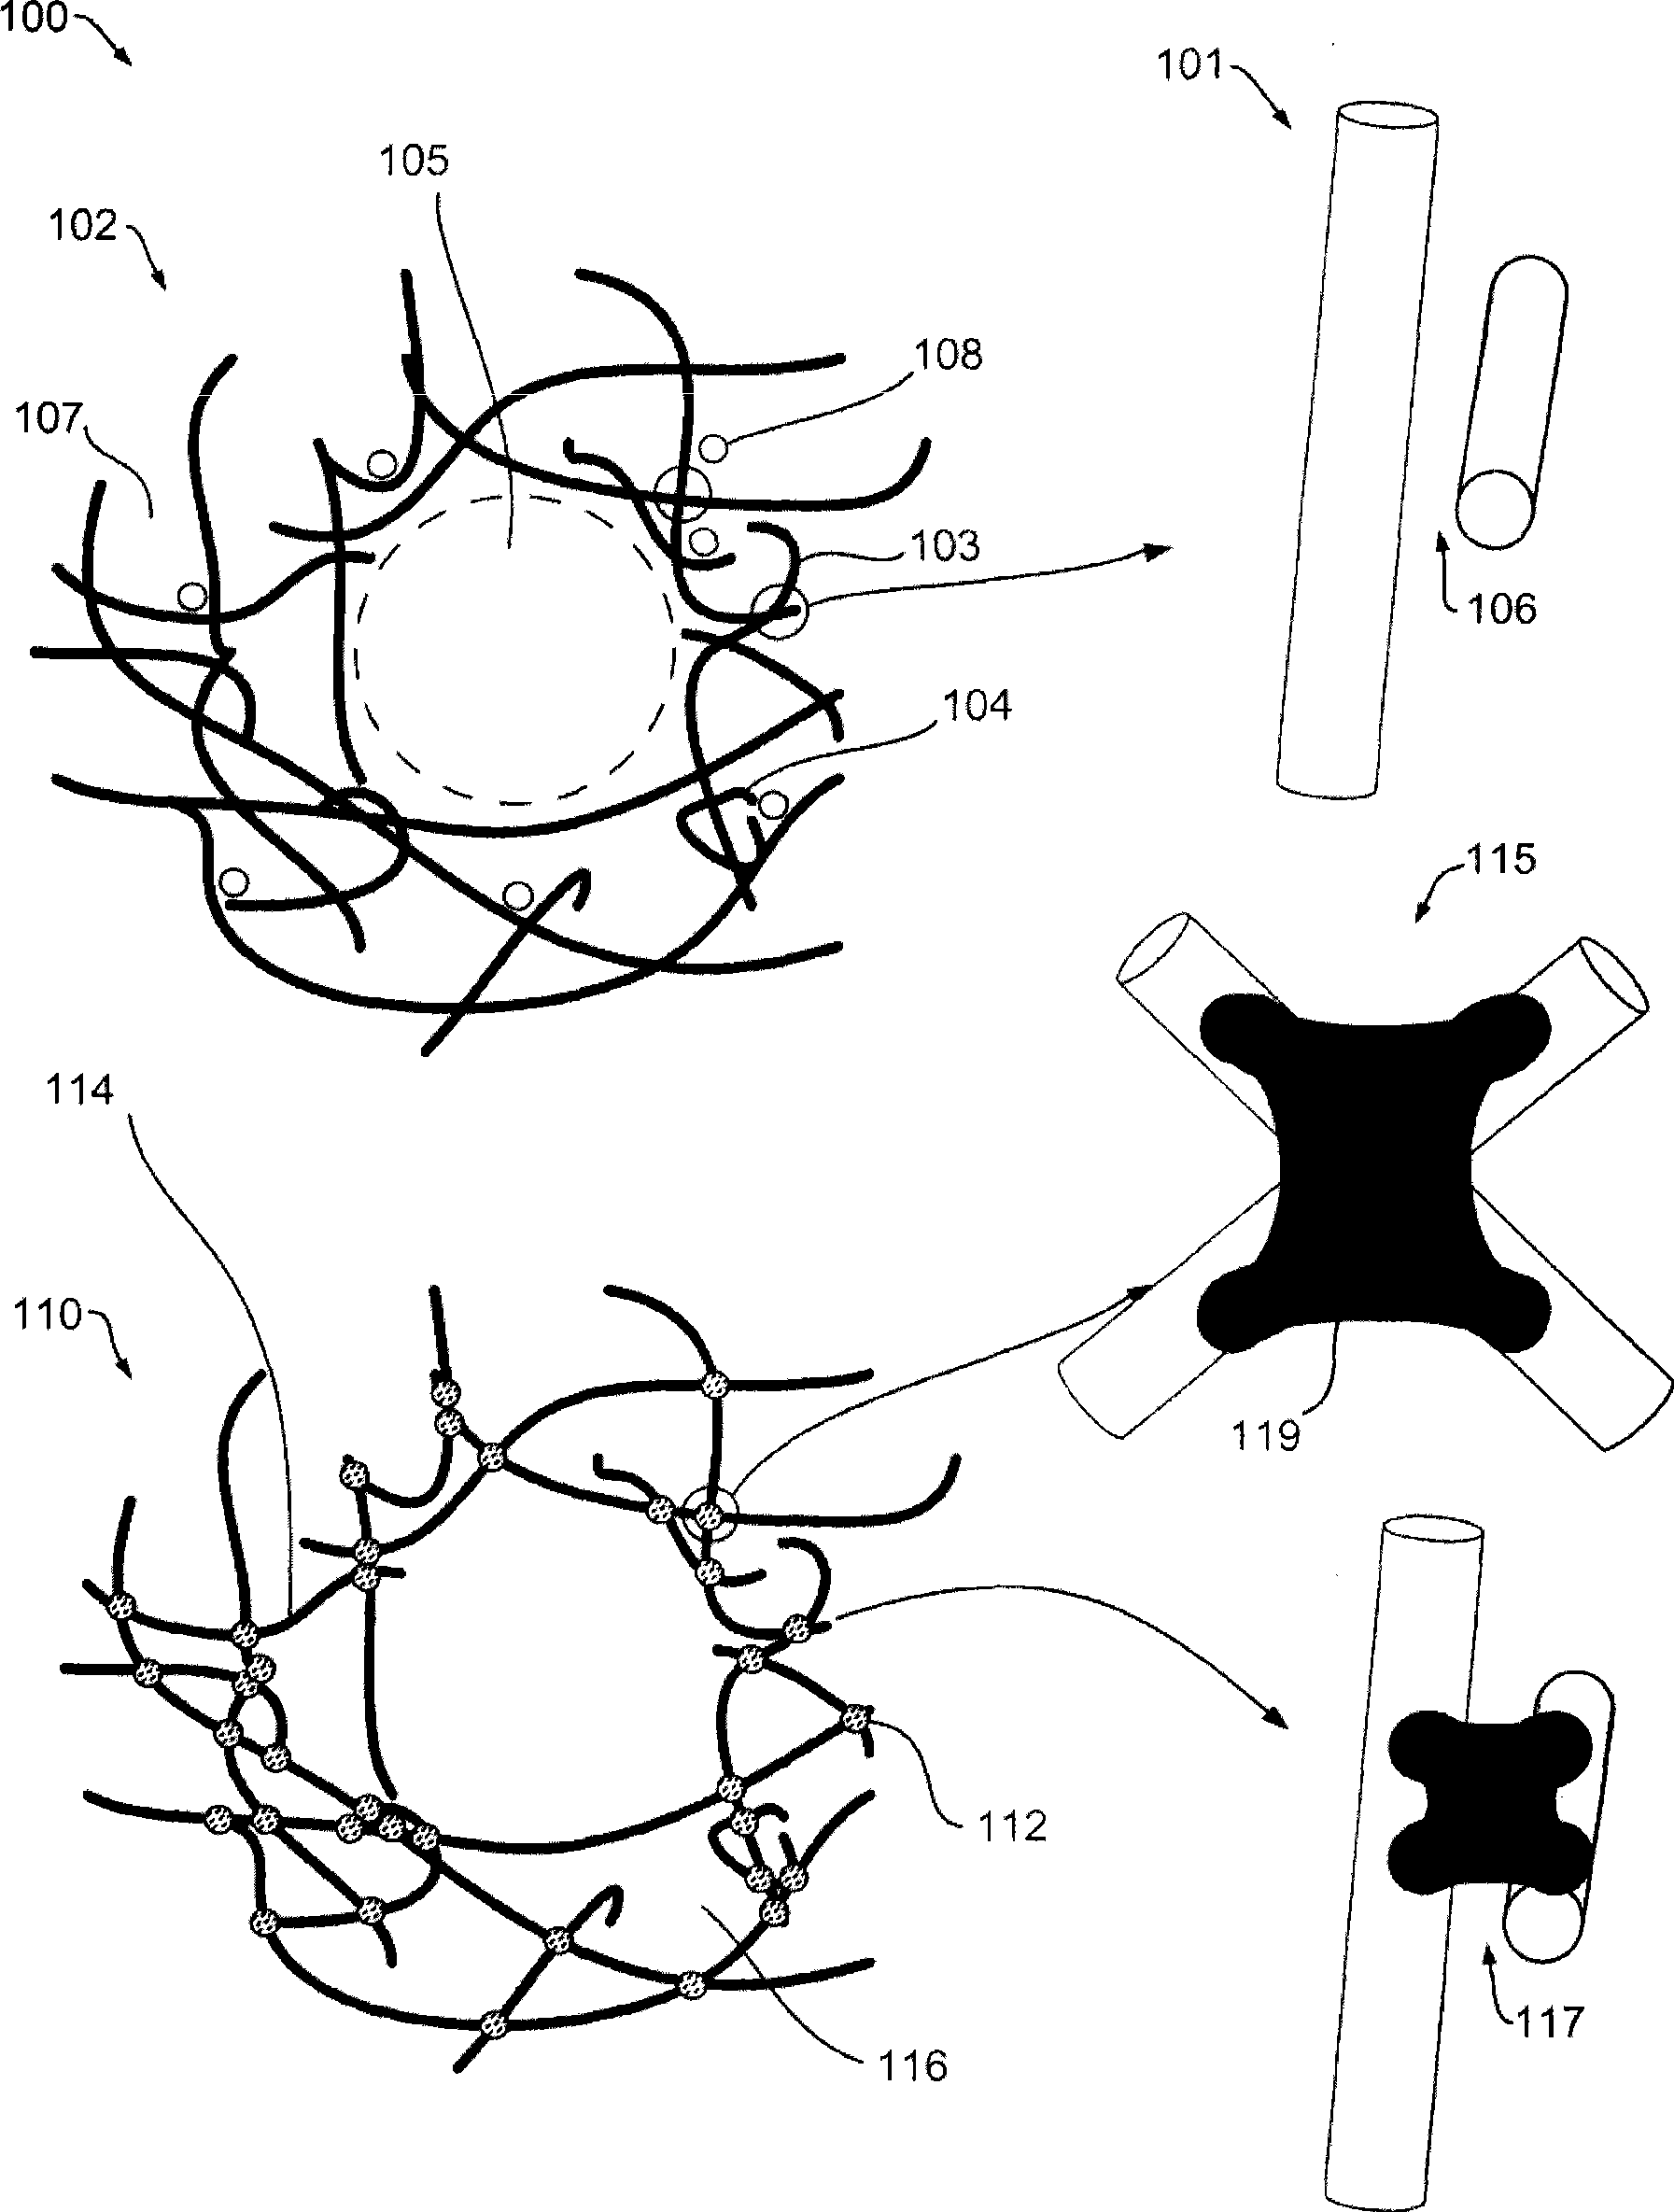 An extruded porous substrate having inorganic bonds